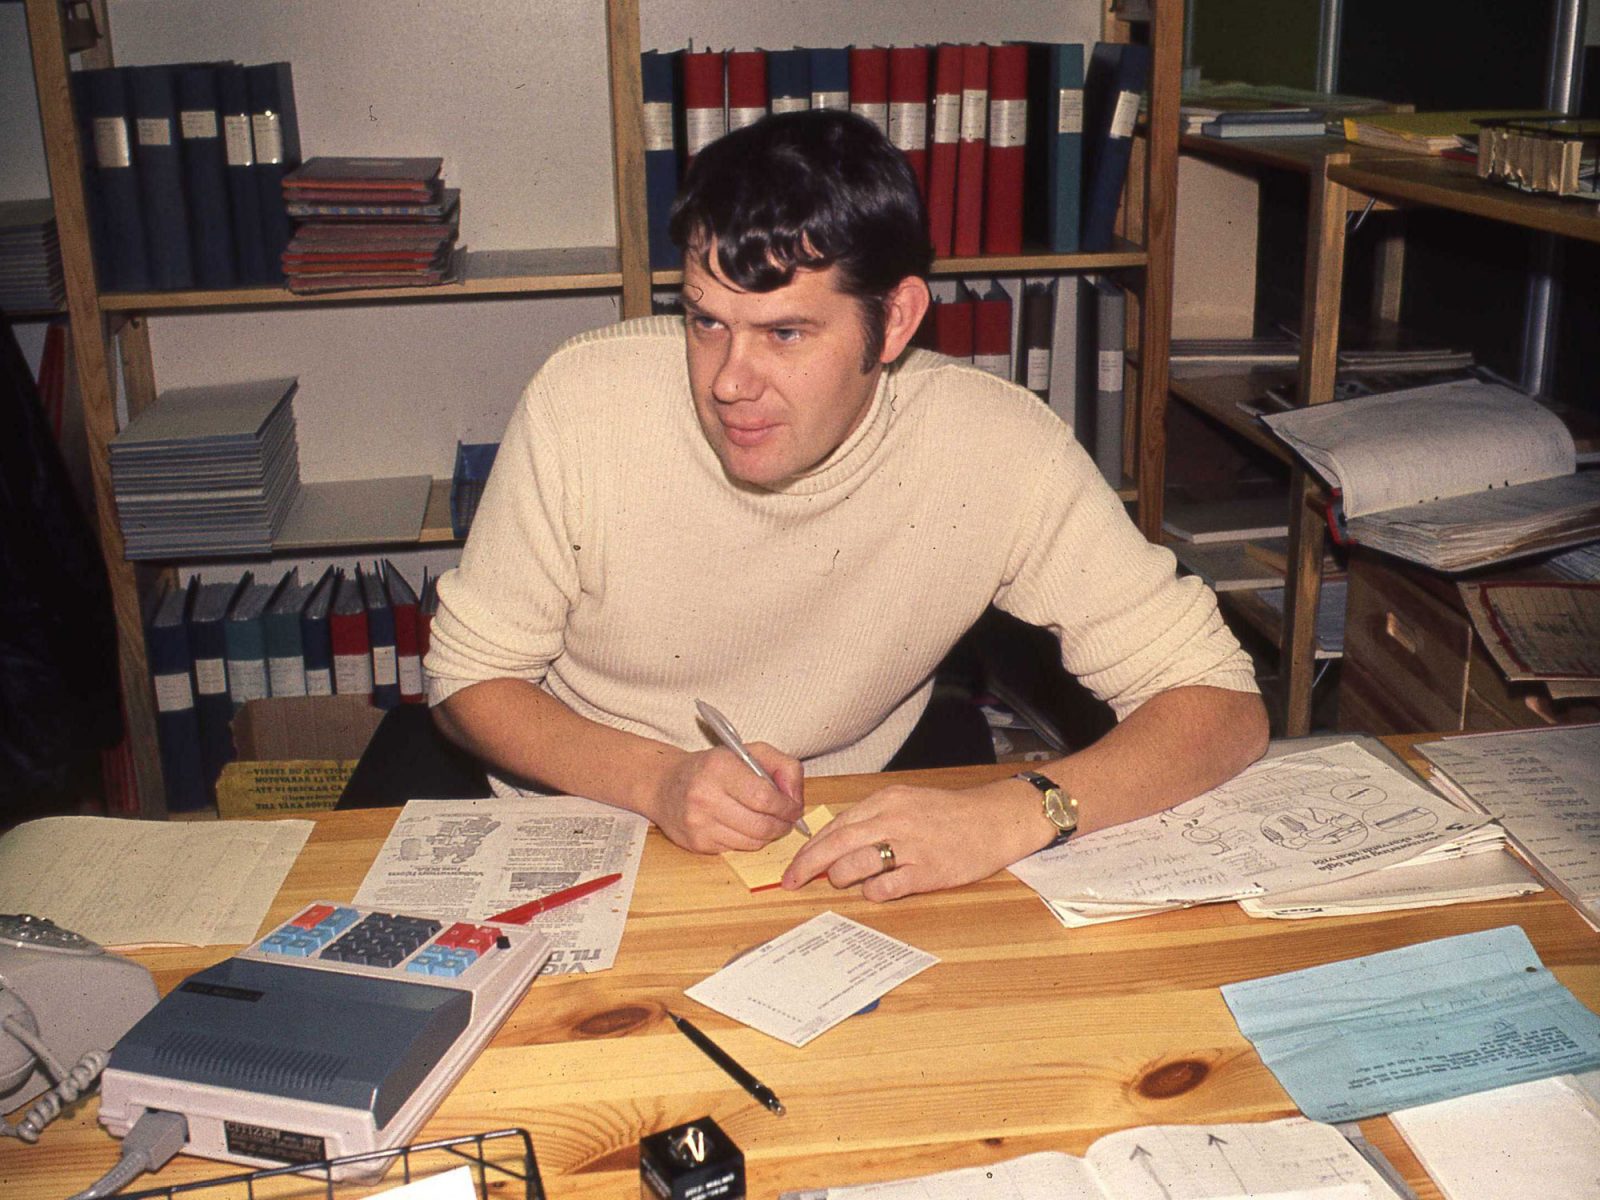 Lars Göran Peterson, young man with 1970s style sideburns and white knitted turtleneck sweater works at desk